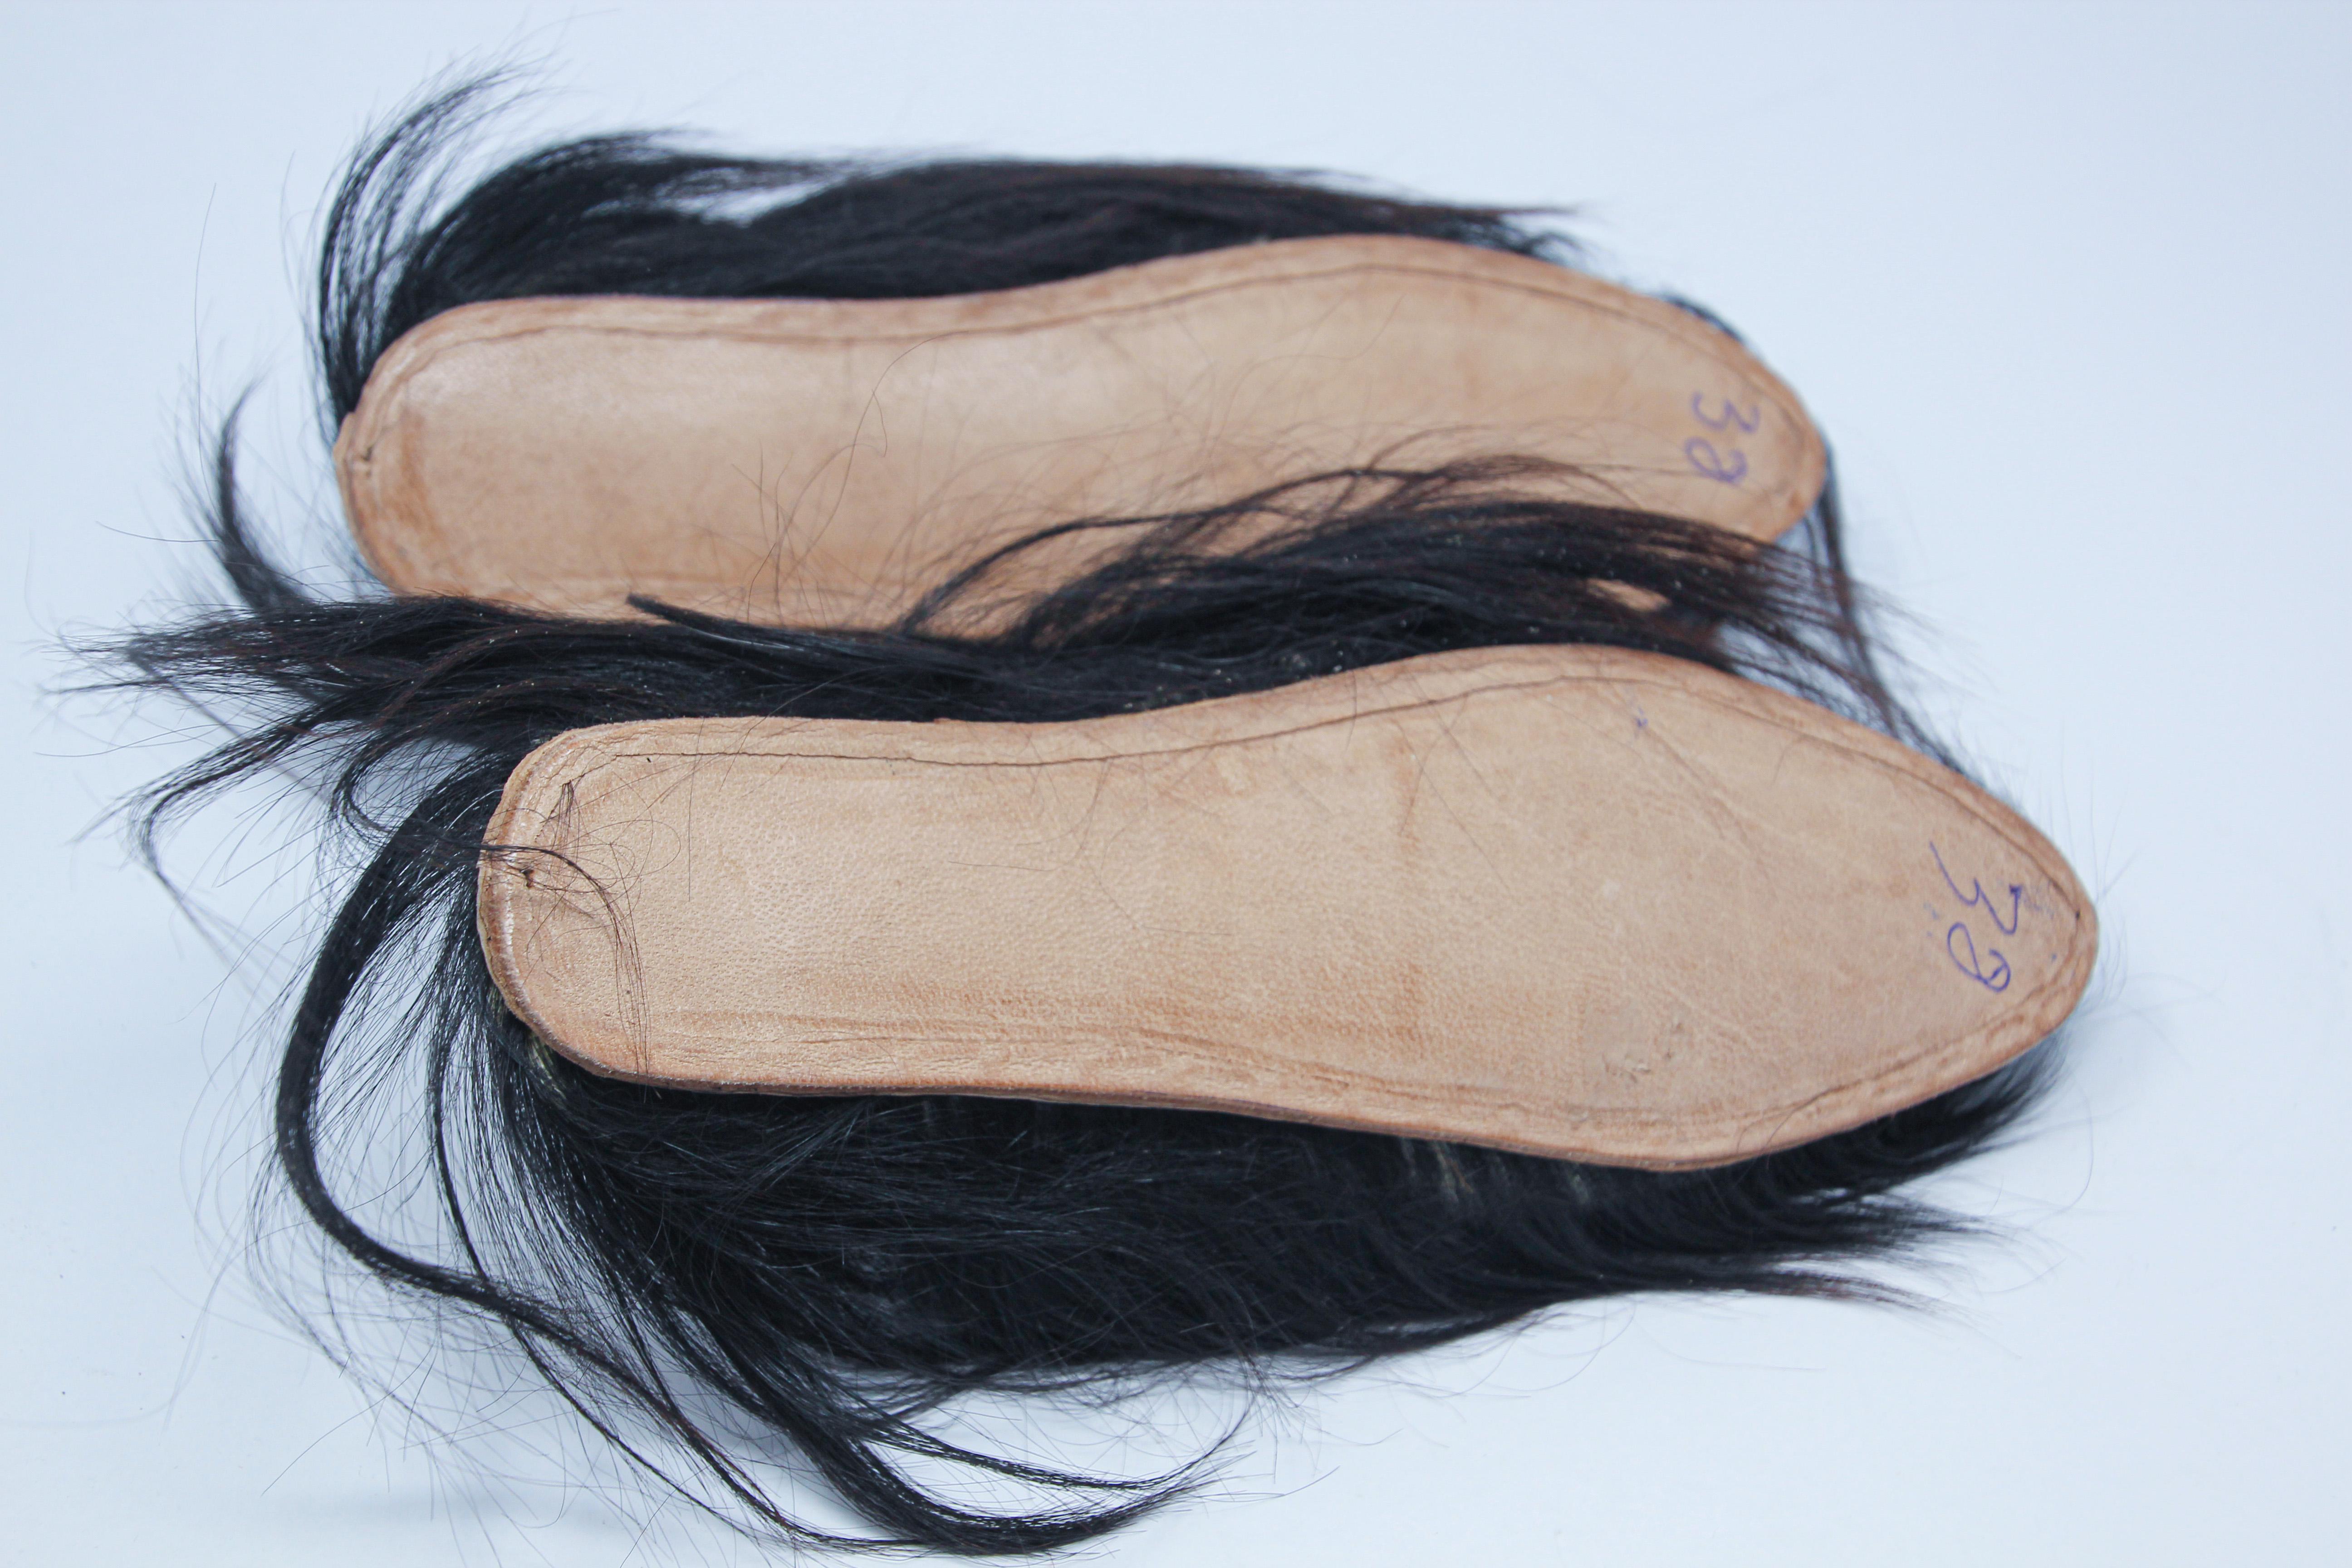 Moroccan Black Goat Hair Slippers In Good Condition For Sale In North Hollywood, CA